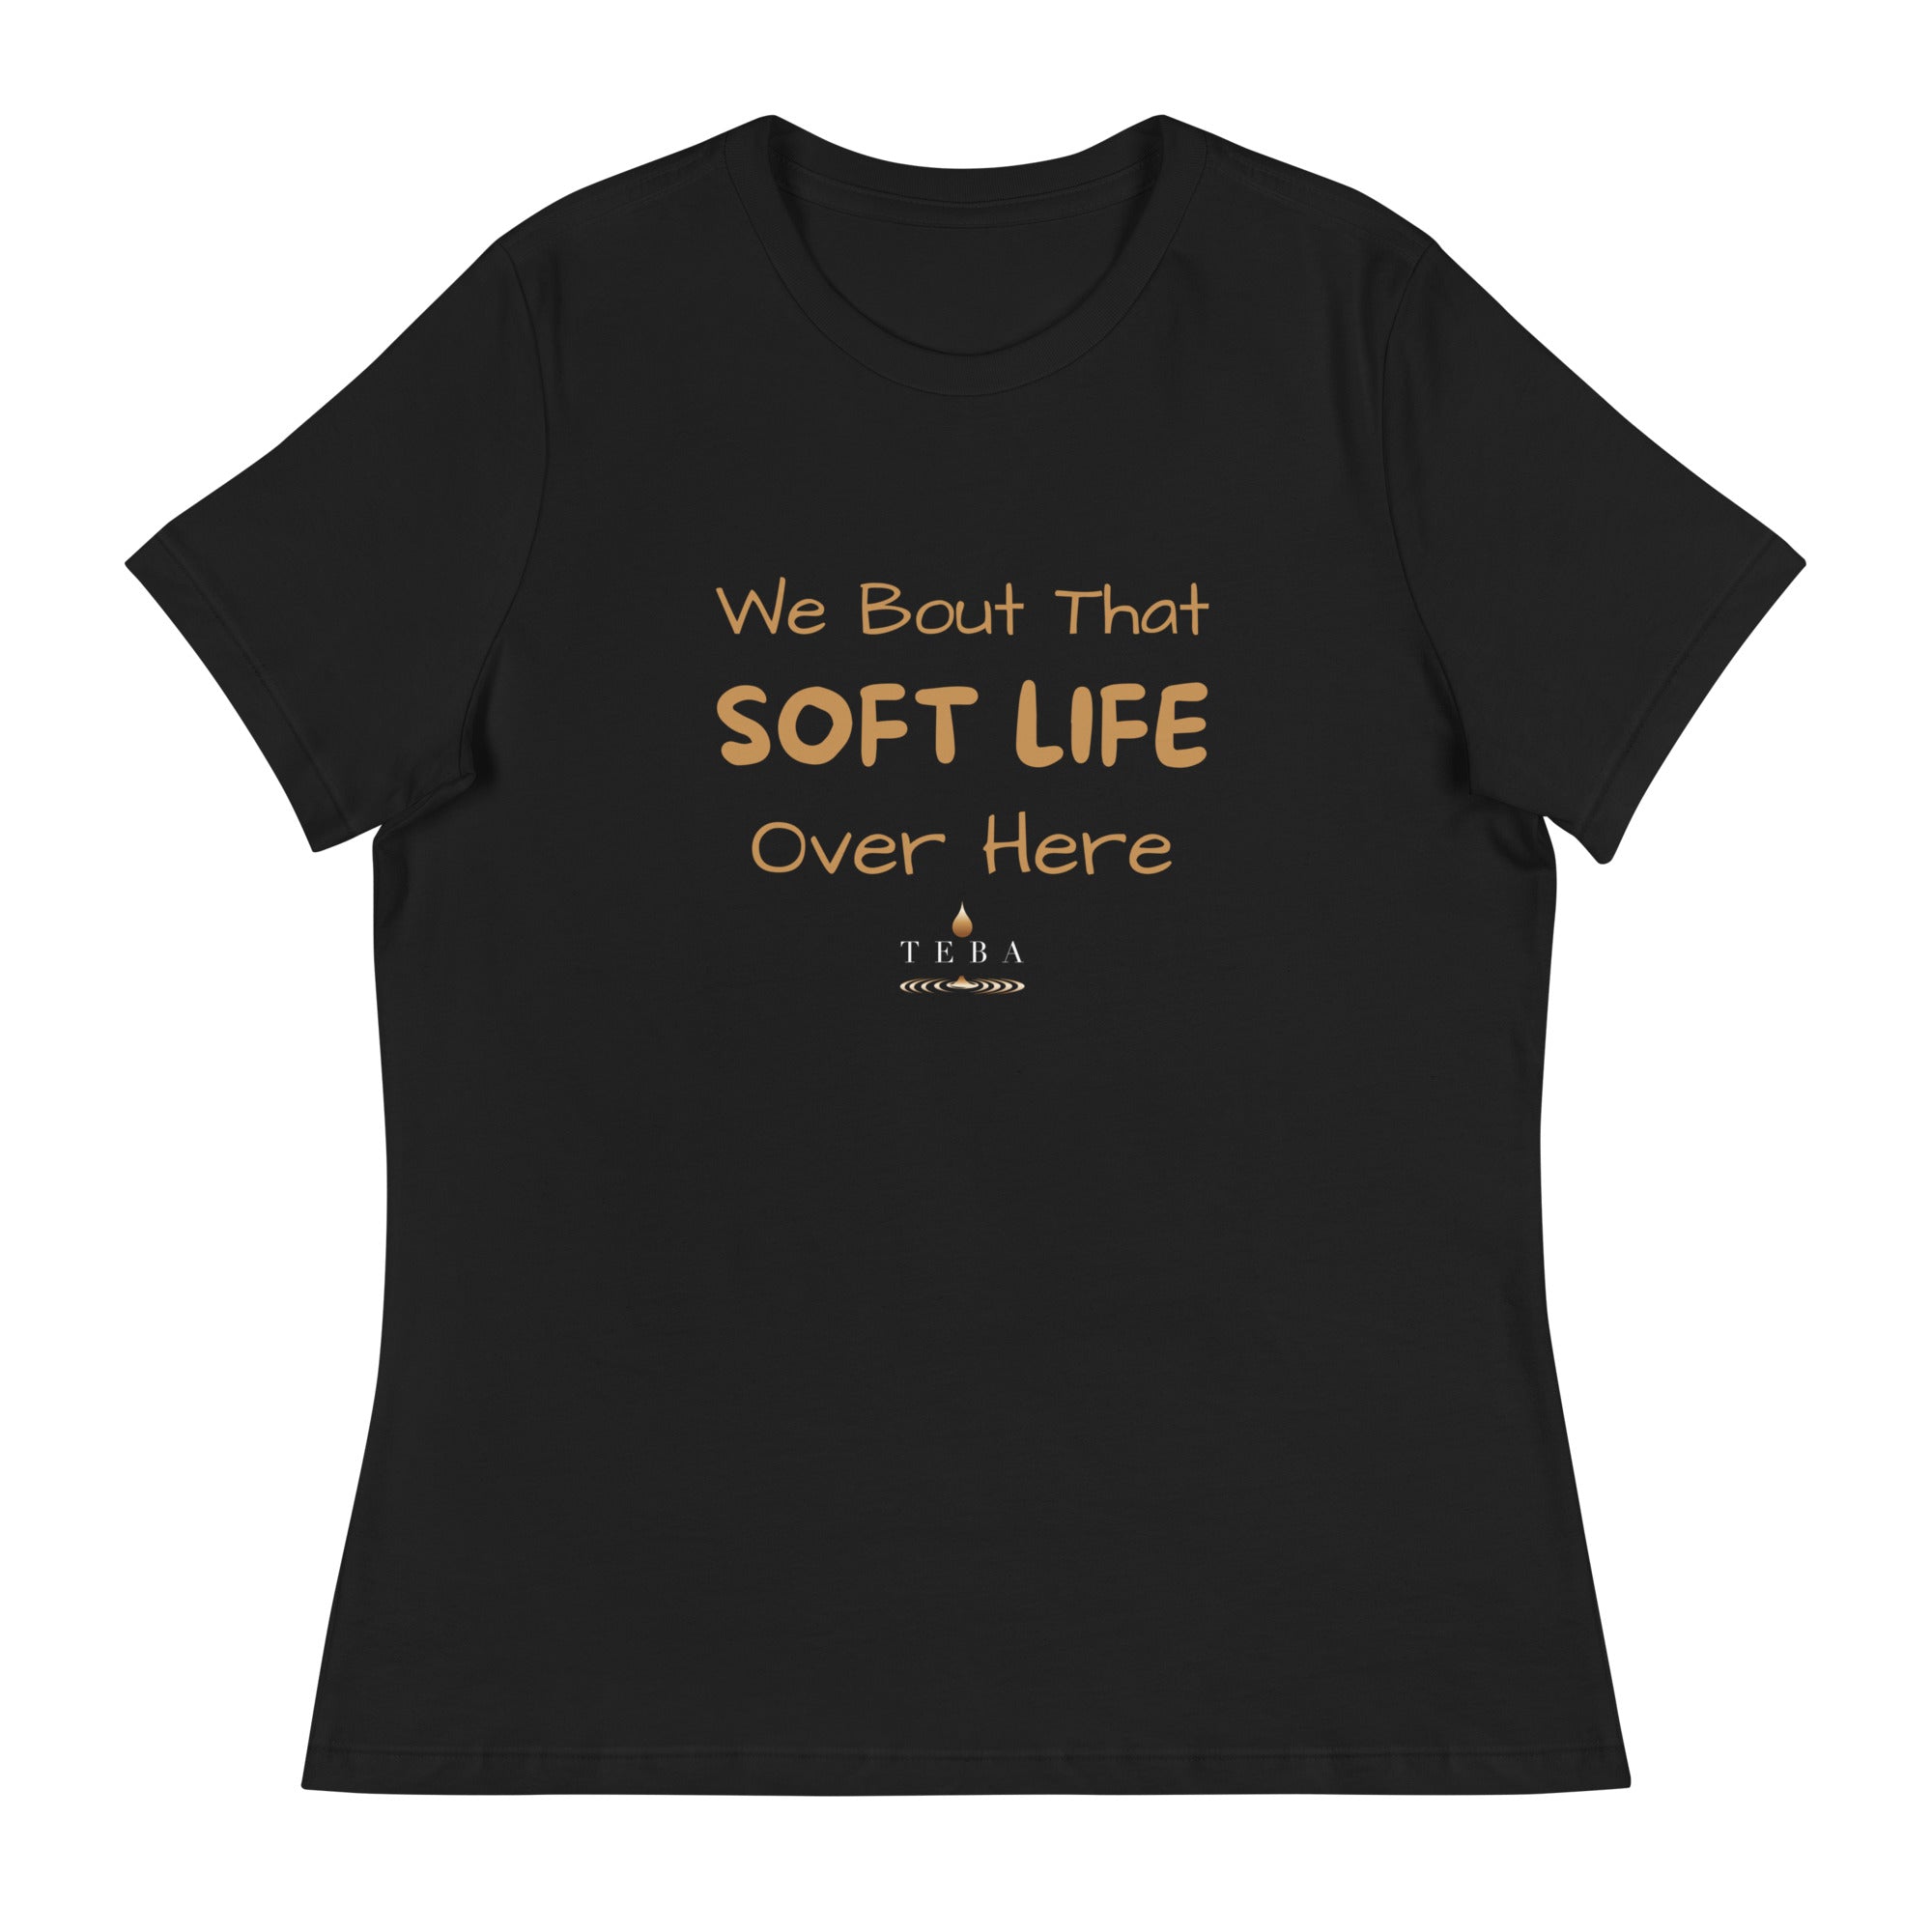 We Bout That Soft Life Over Here T-Shirt